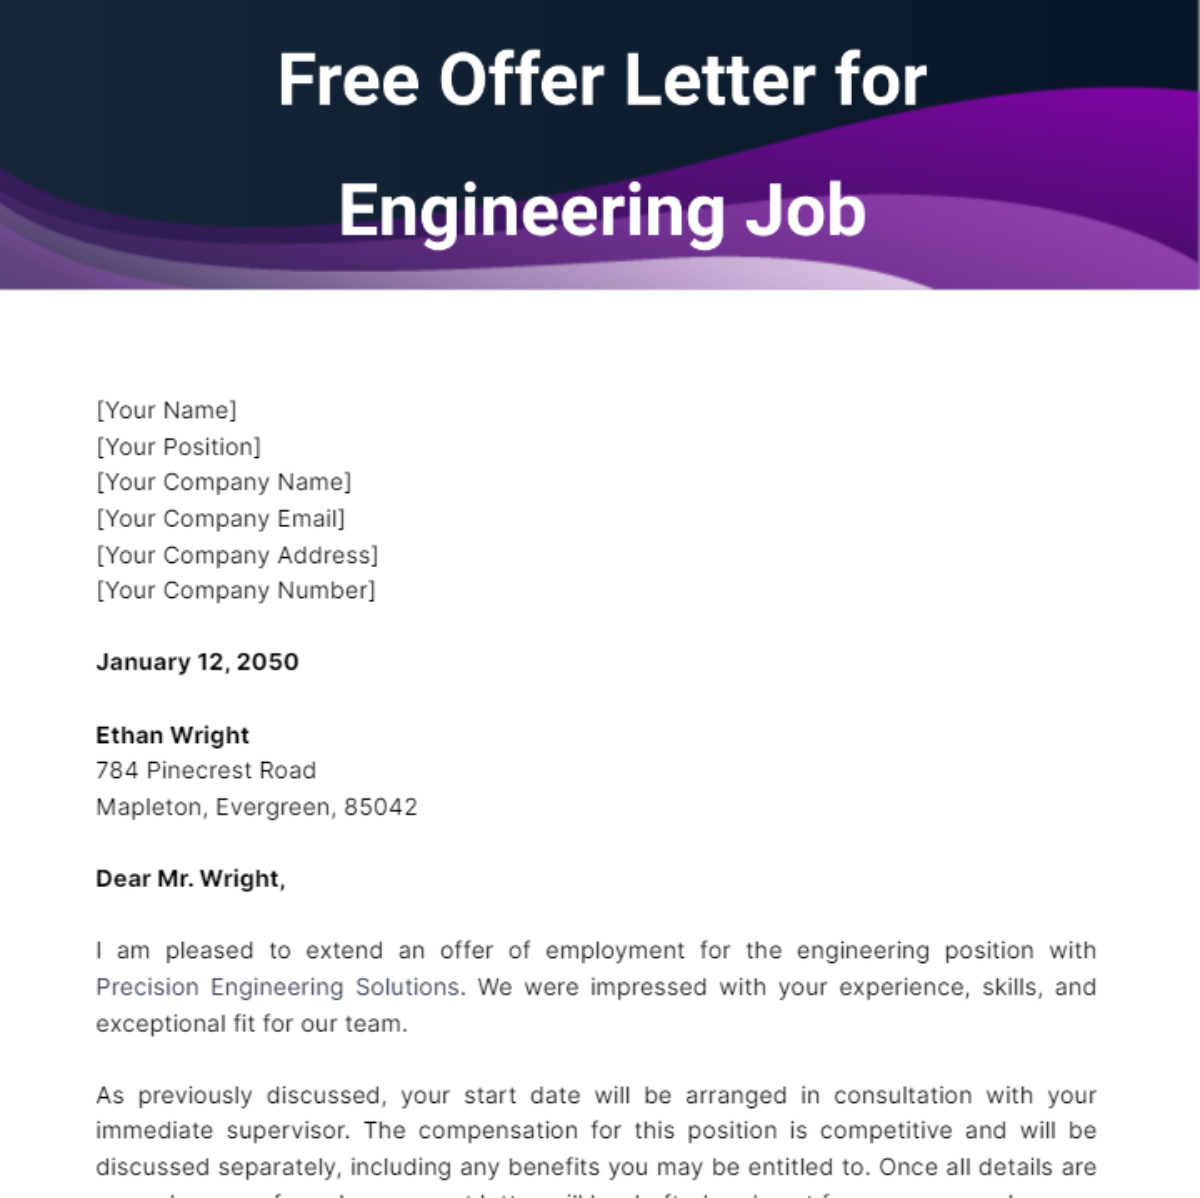 Offer Letter for Engineering Job Template